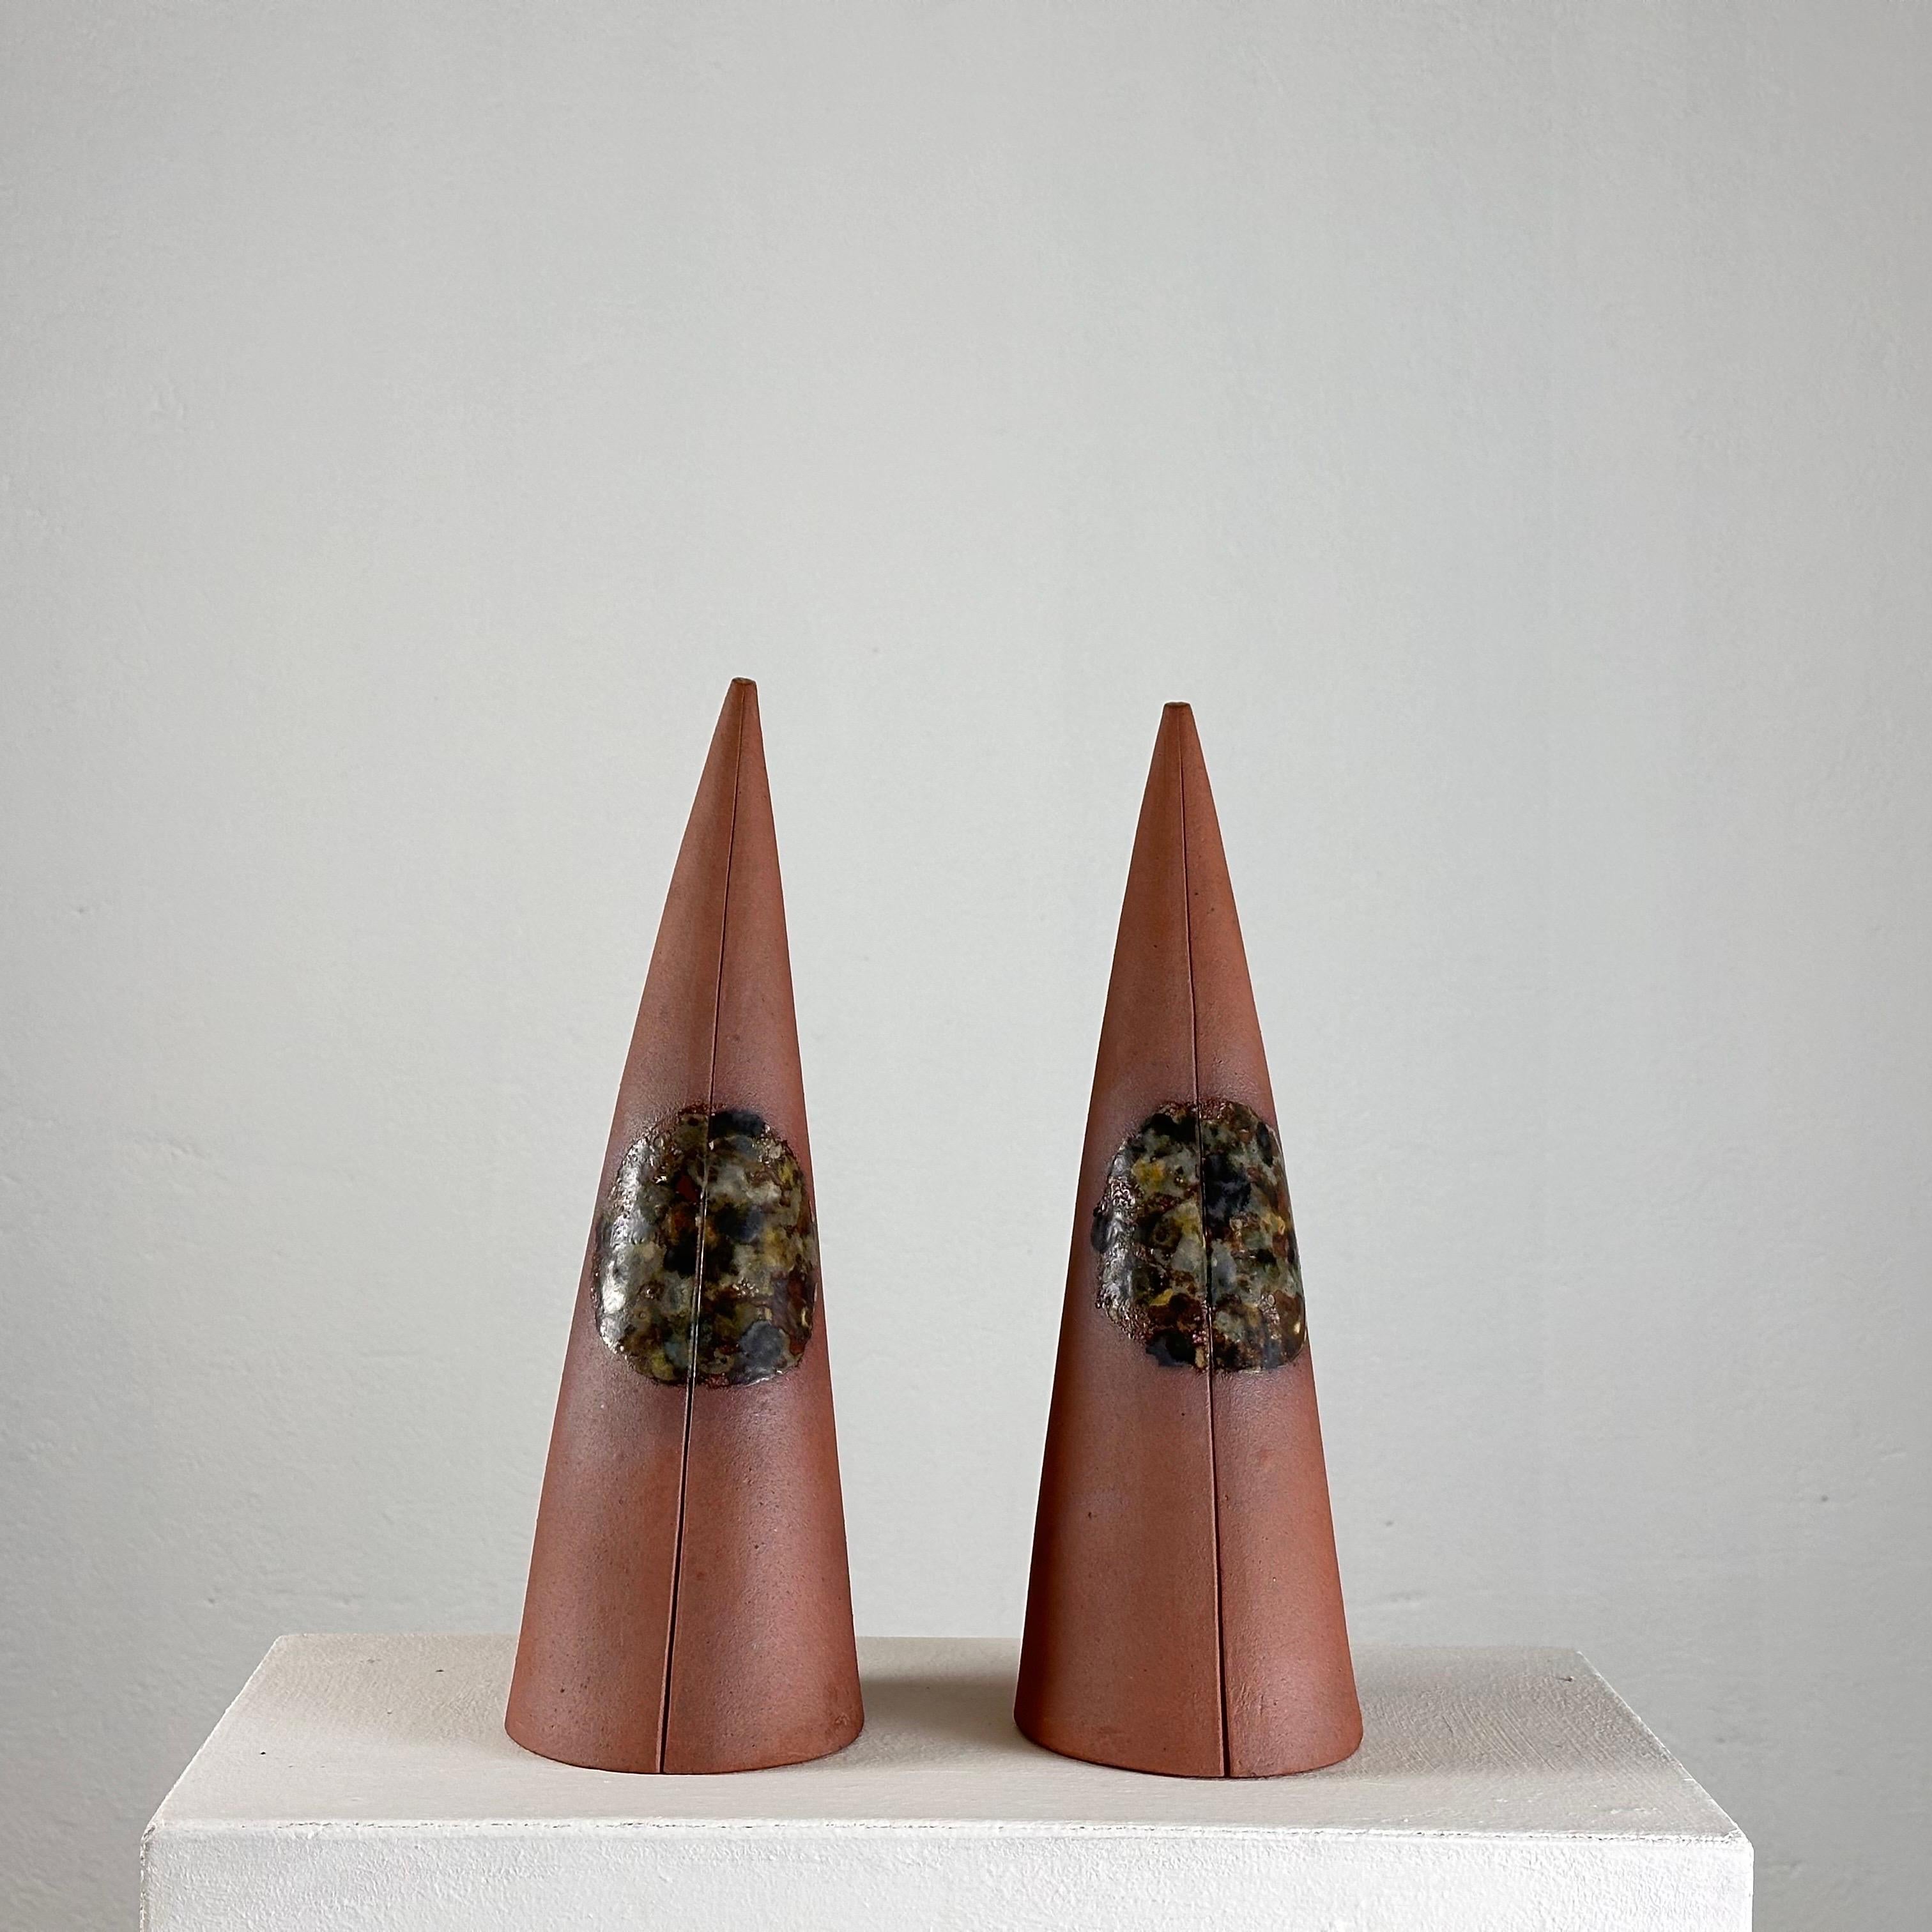 
These cones, signed by the artist, exude a timeless elegance and sophistication. Crafted in a warm terracotta hue and embellished with a spherical motif at the midpoint, reminiscent of the cosmos, they evoke a sense of cosmic harmony and